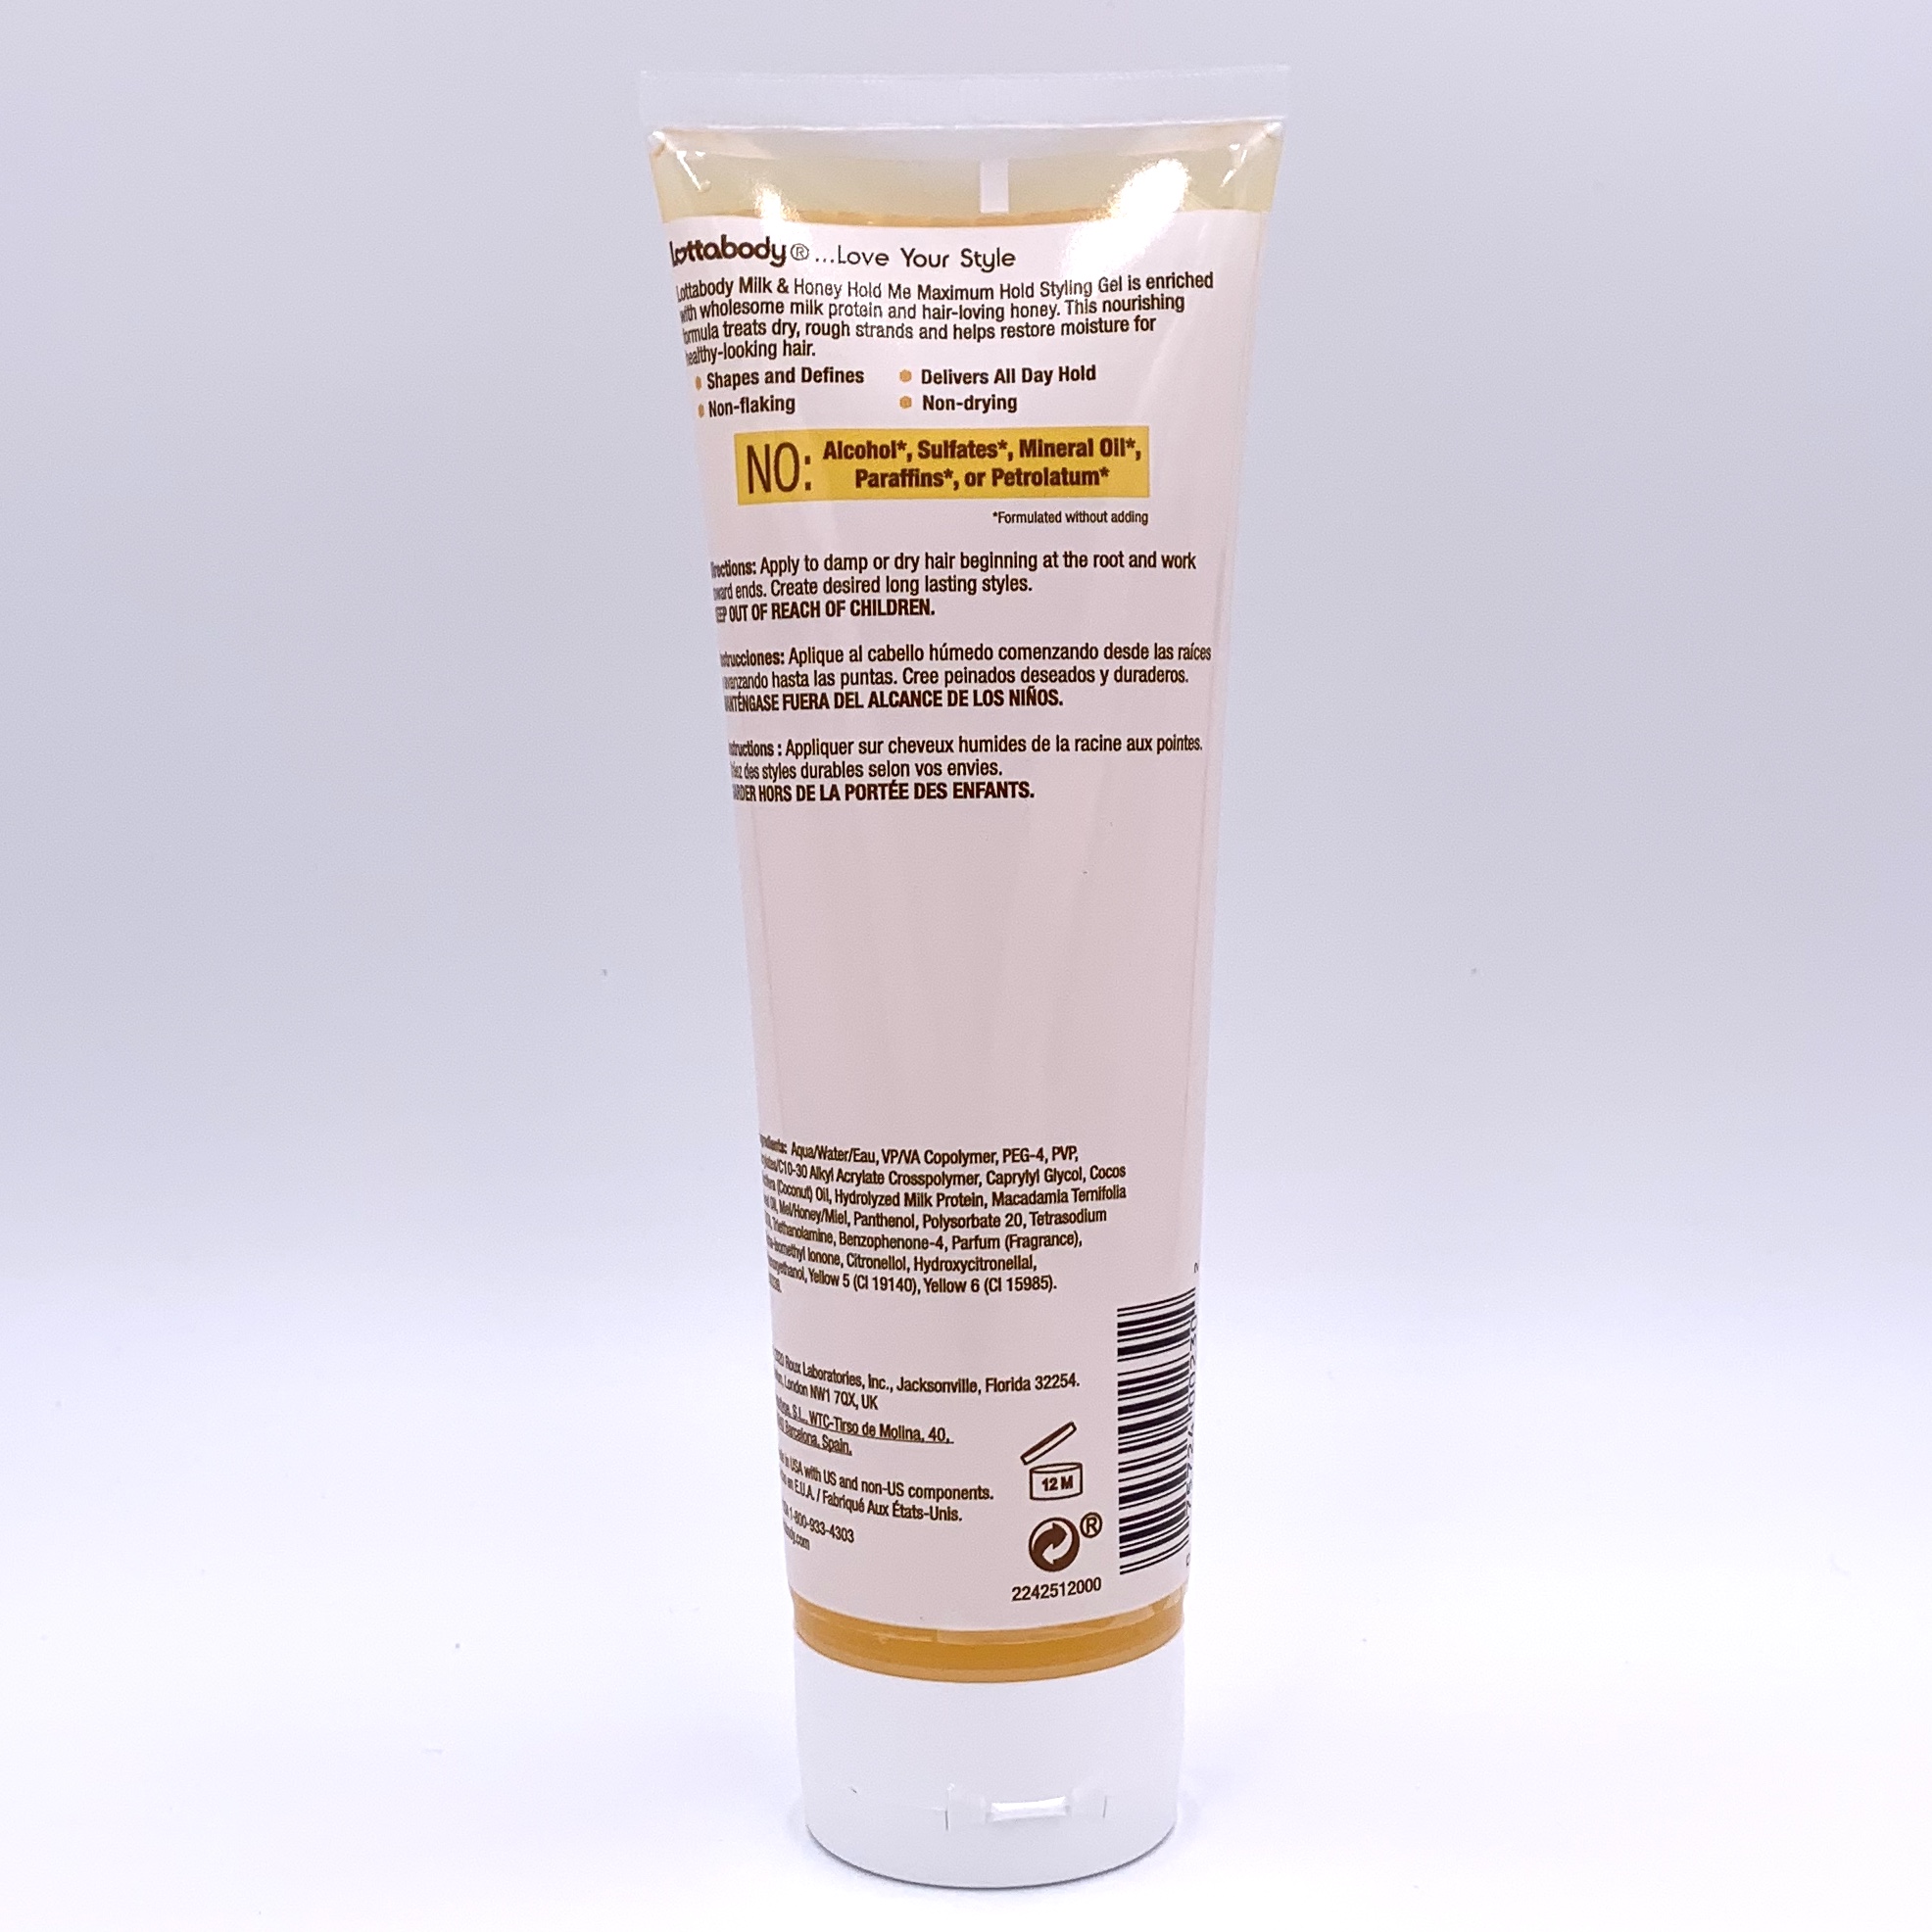 LottaBody Hold Me Maximum Hold Styling Gel Back for Cocotique August 2020